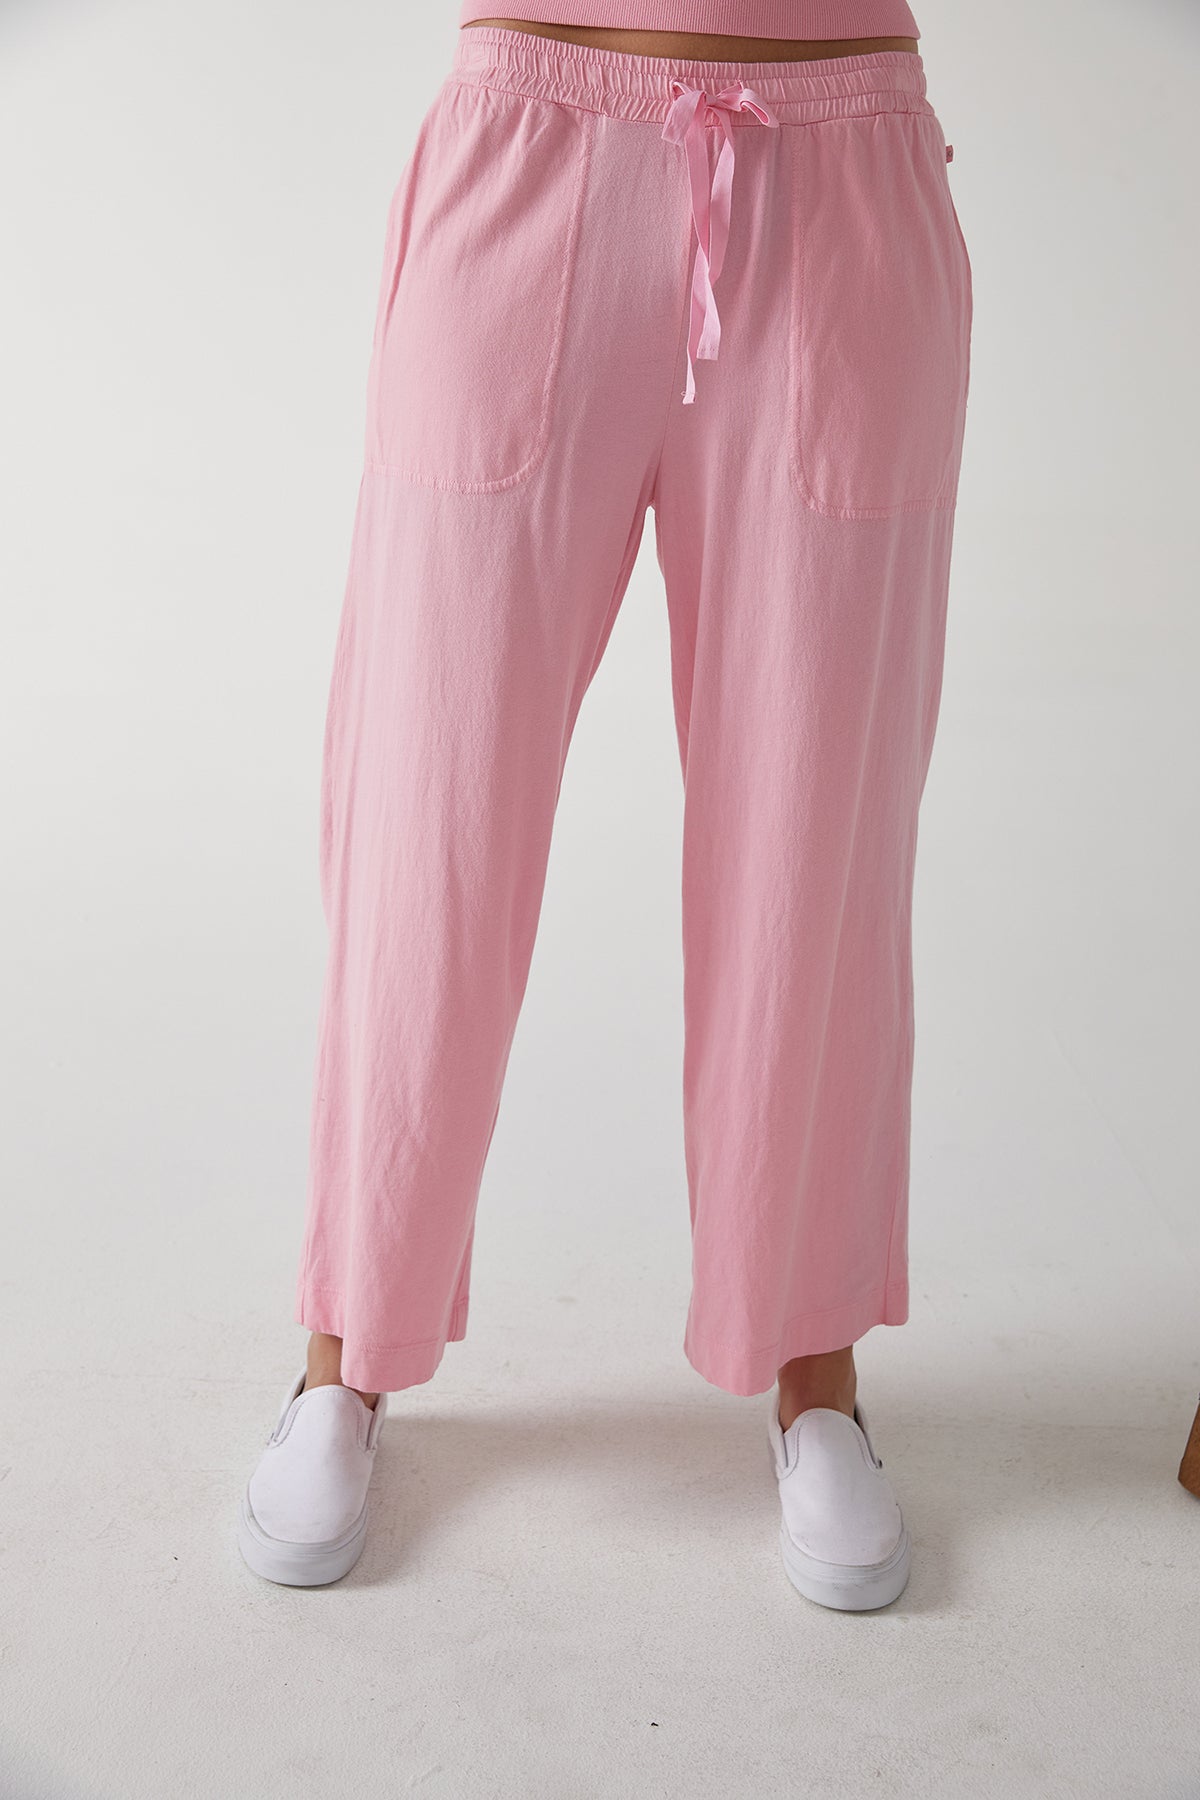   pismo pant cupid front 